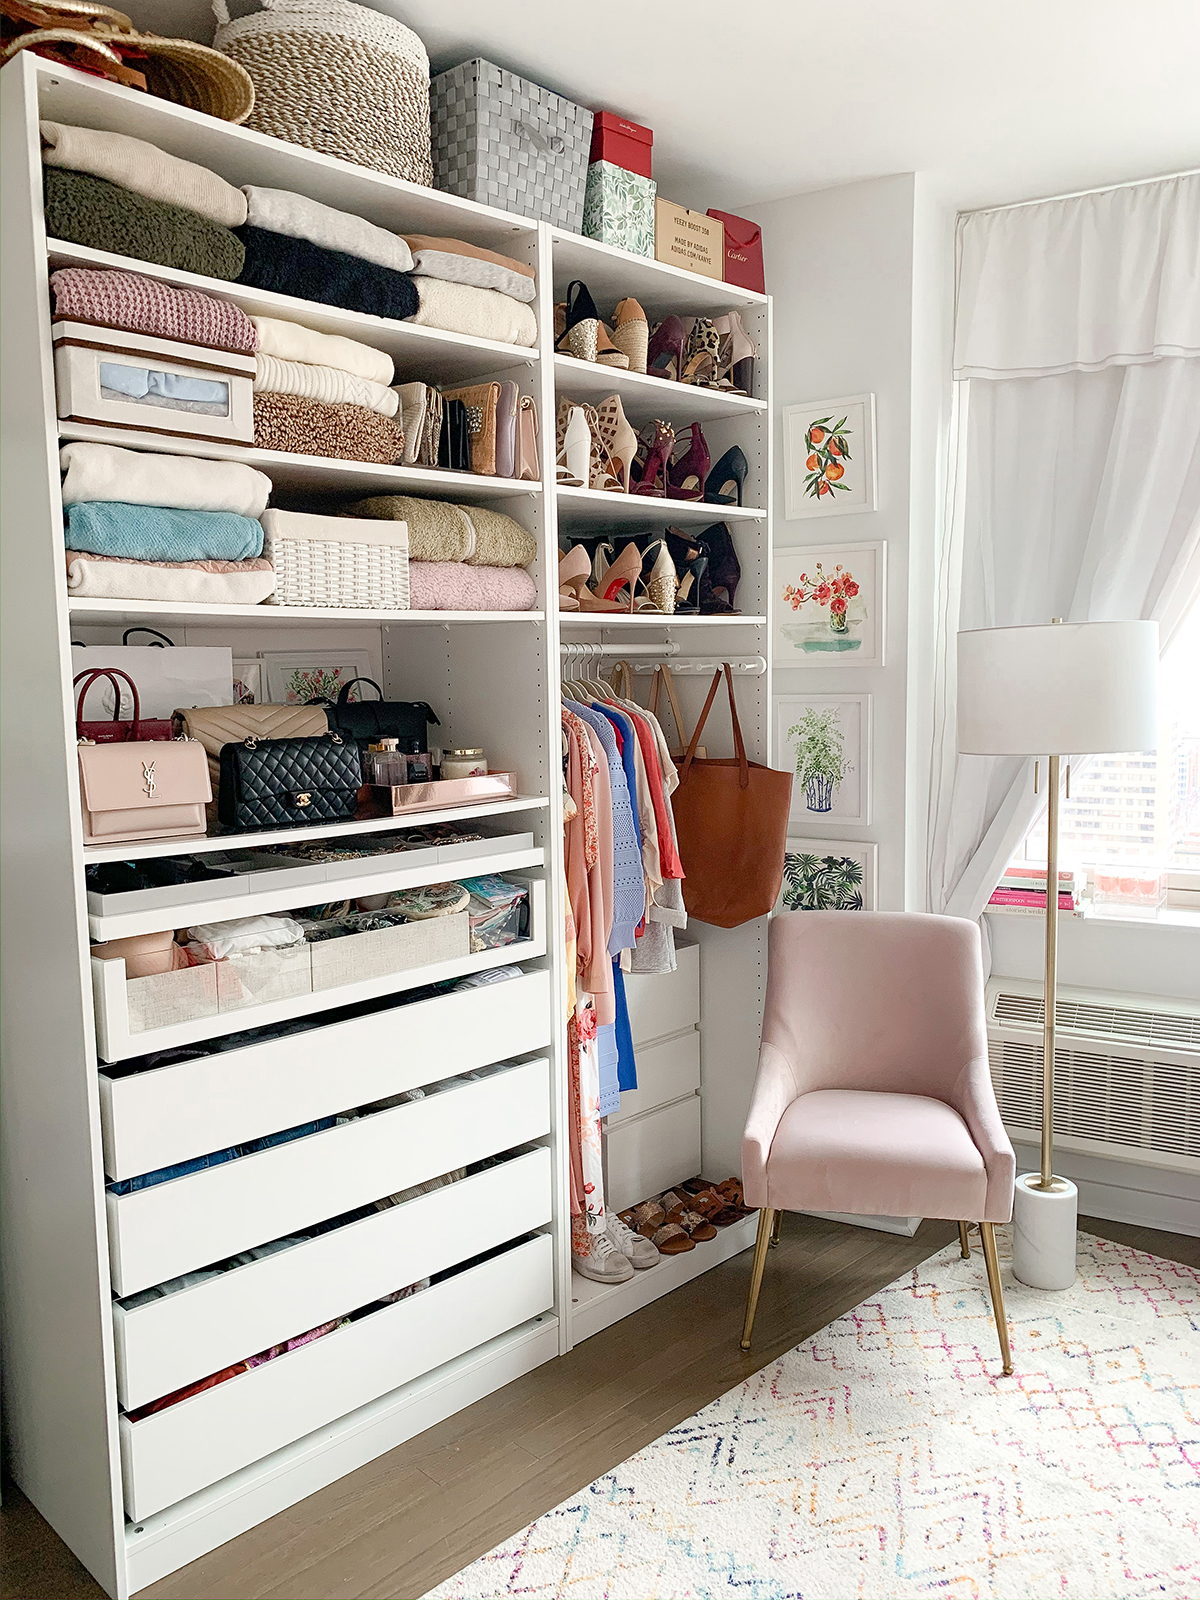 Custom Built In Closet Reveal Drawer Organization Tips Katie S Bliss,Breakfast Nook Tables And Chairs